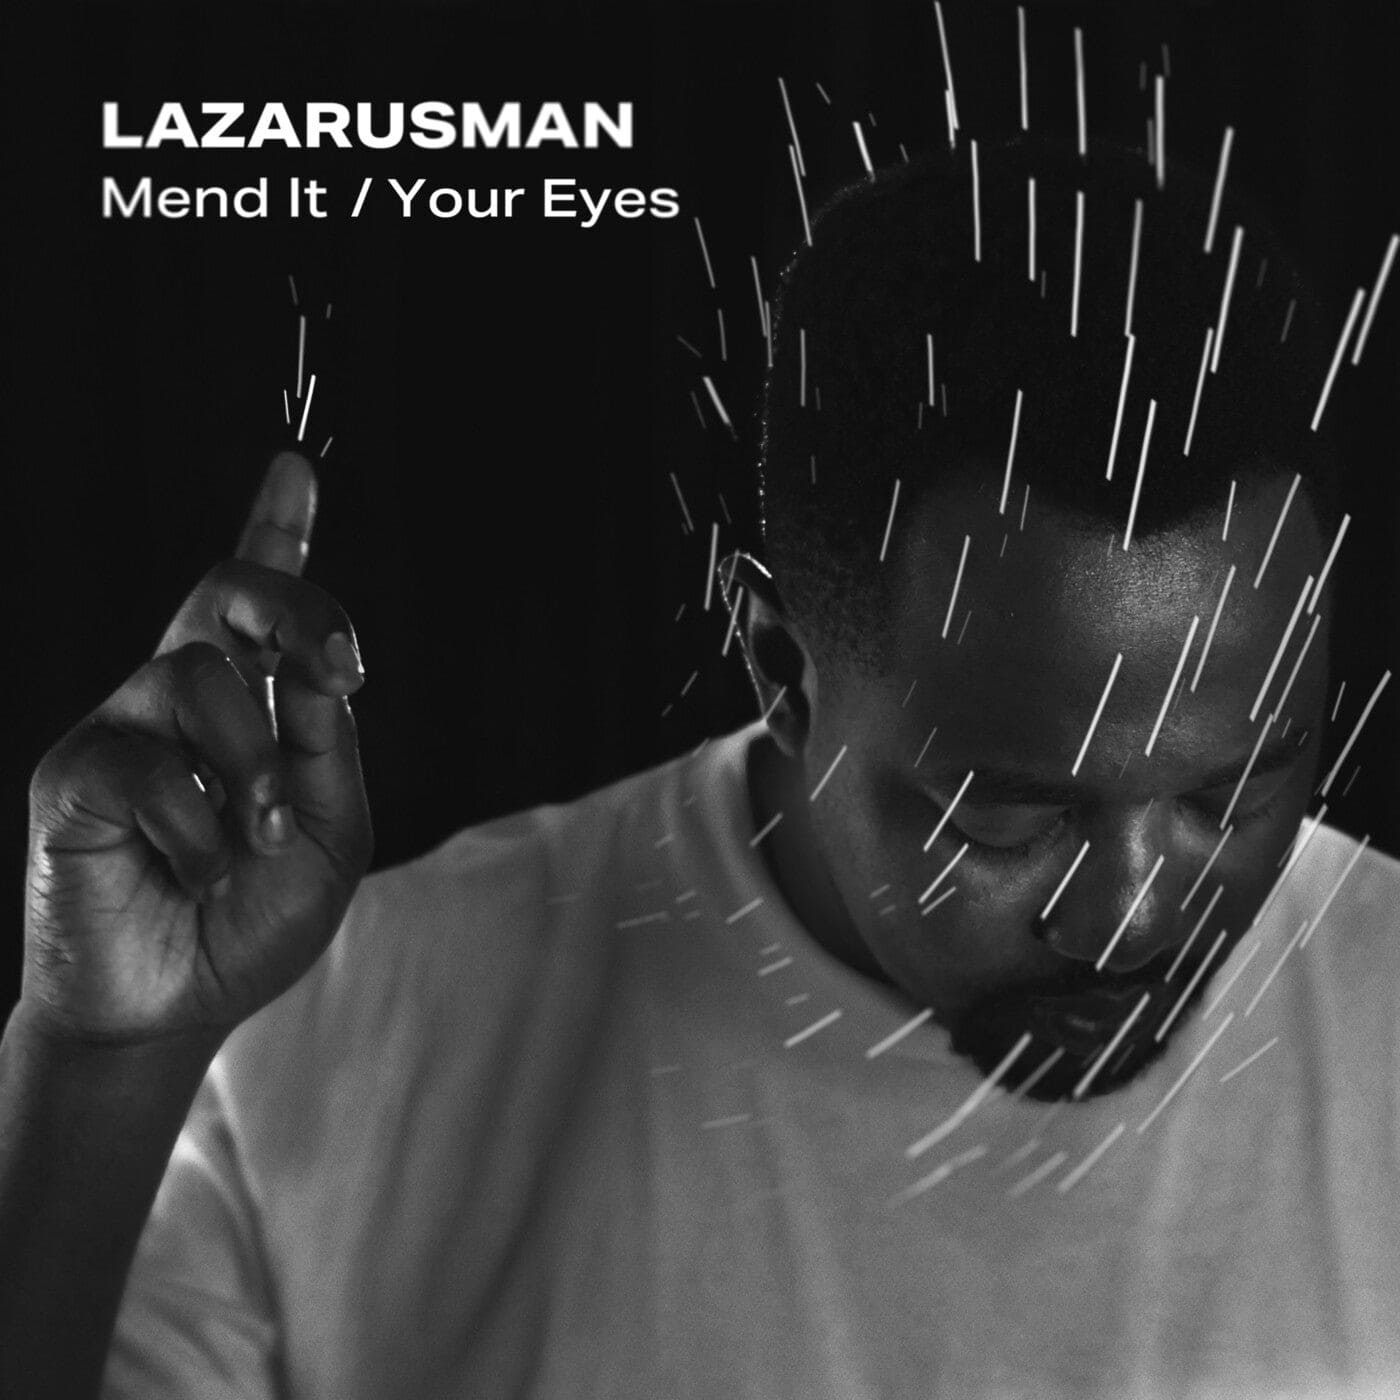 image cover: Lazarusman, Fka Mash, Stimming - Mend It / Your Eyes / CNS119